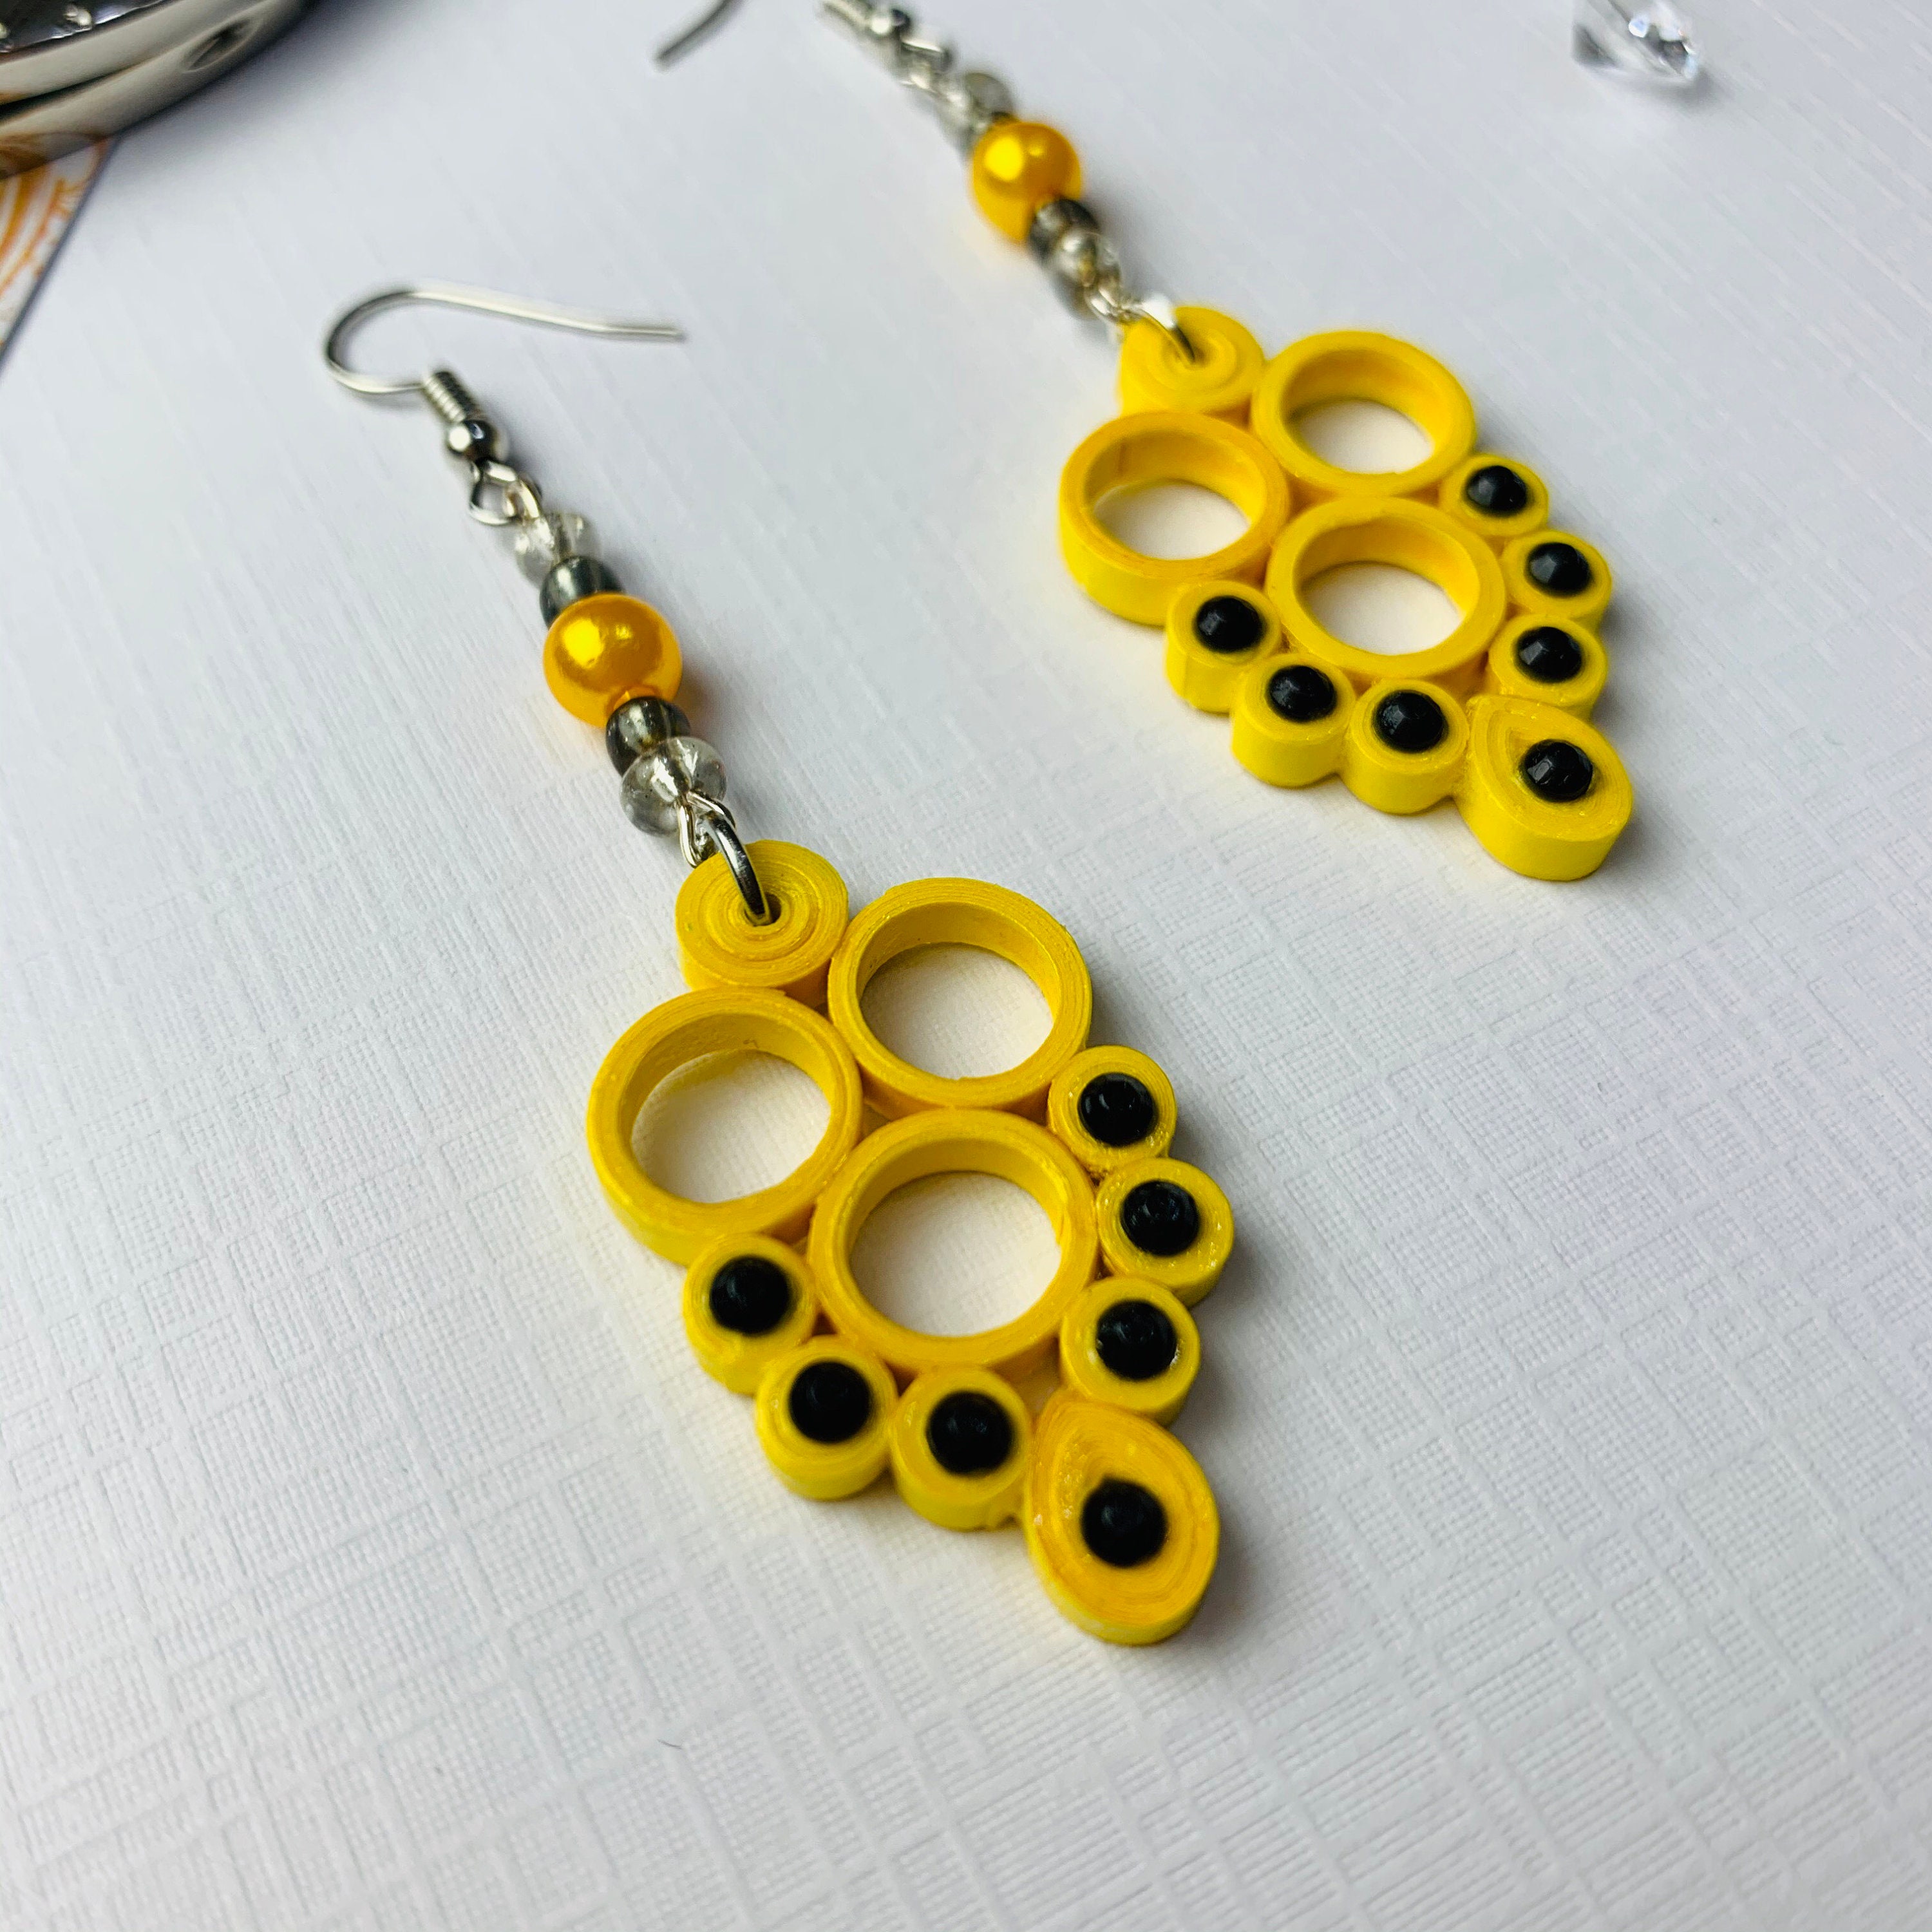 Buy Yellow Round Design Handmade Paper Quilling Earrings for Women  Girls  Online at Low Prices in India  Paytmmallcom